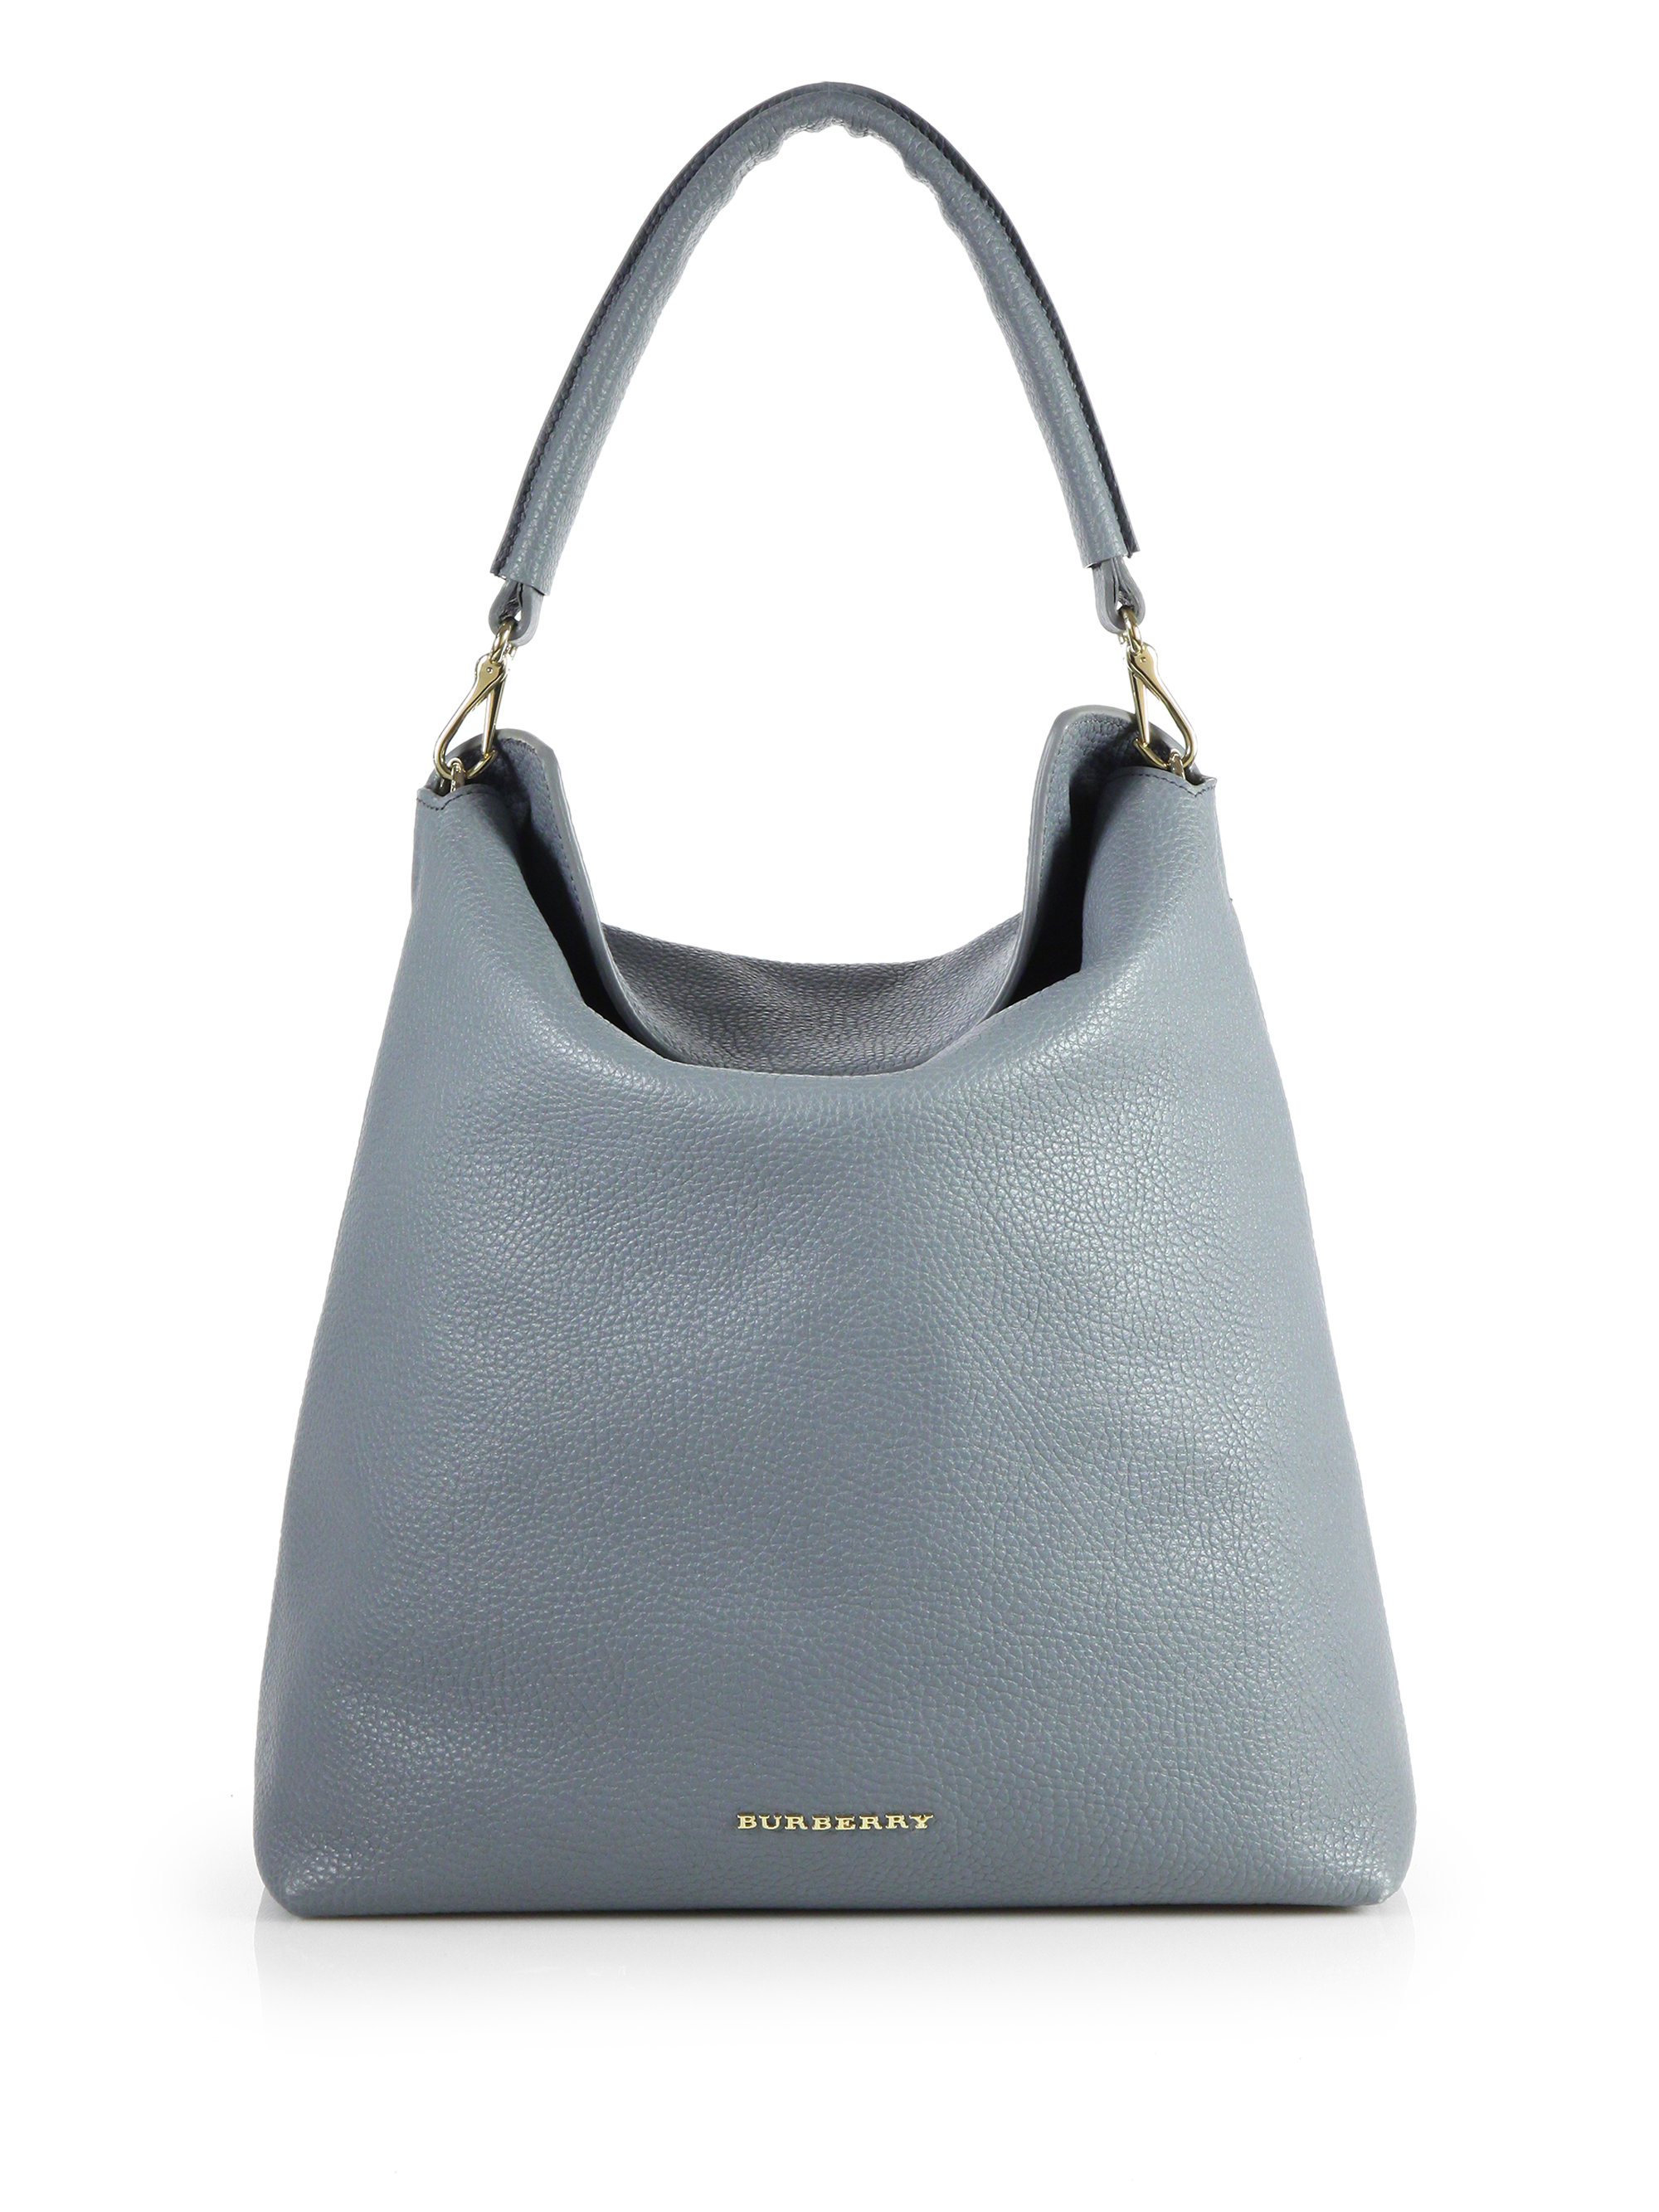 Lyst - Burberry Pebble Leather Hobostyle Tote in Gray